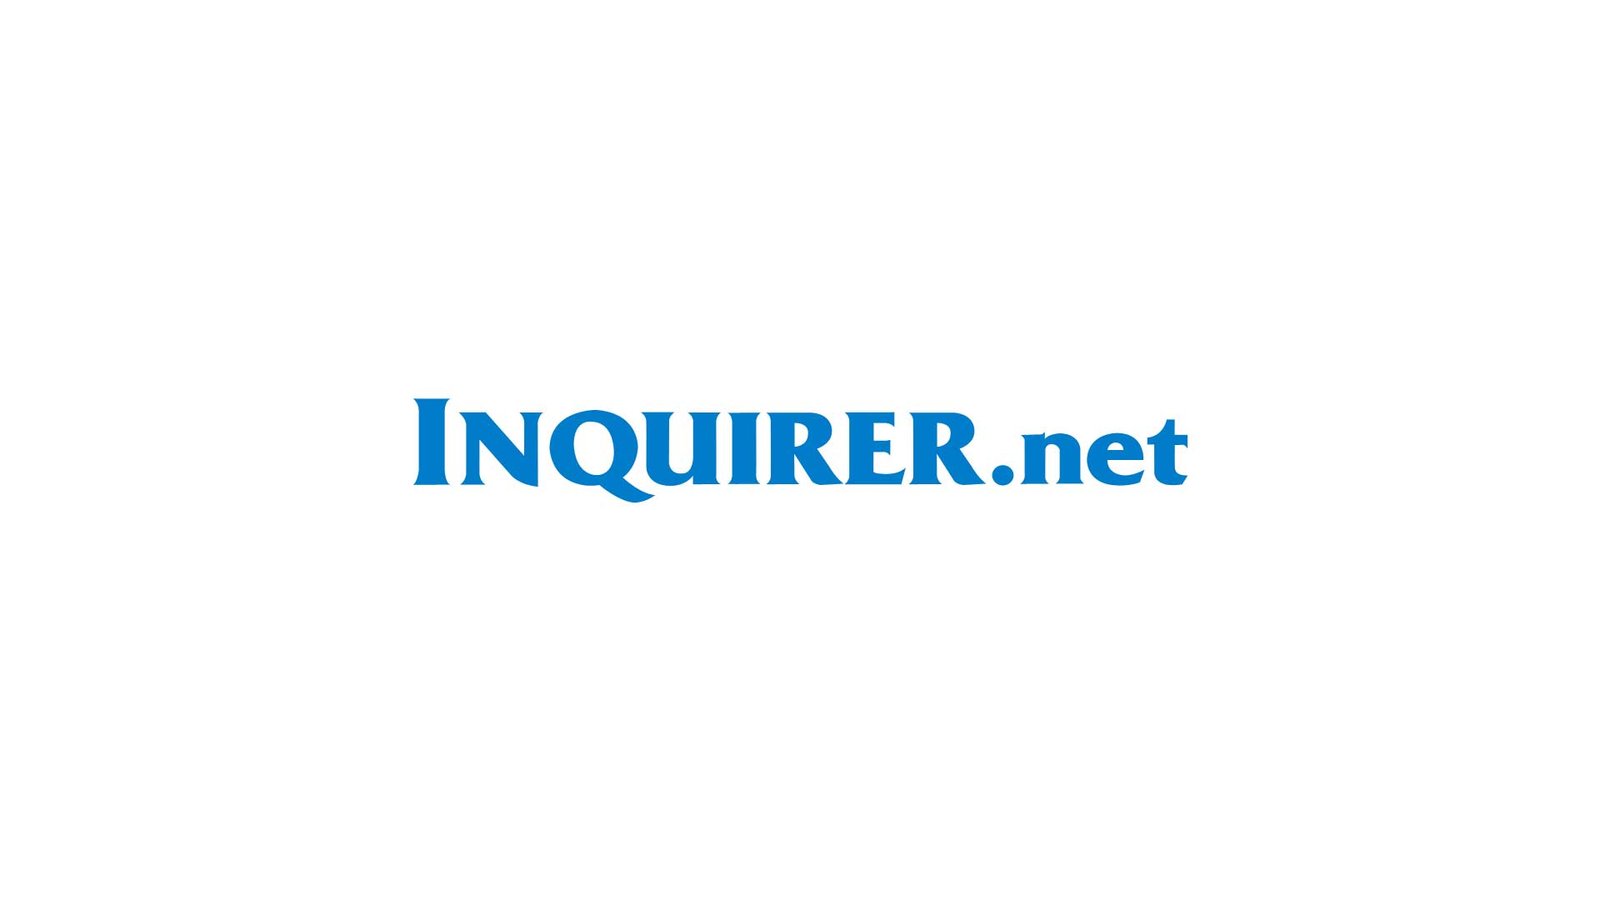 Release P25 B drivers subsidy DOTr urged